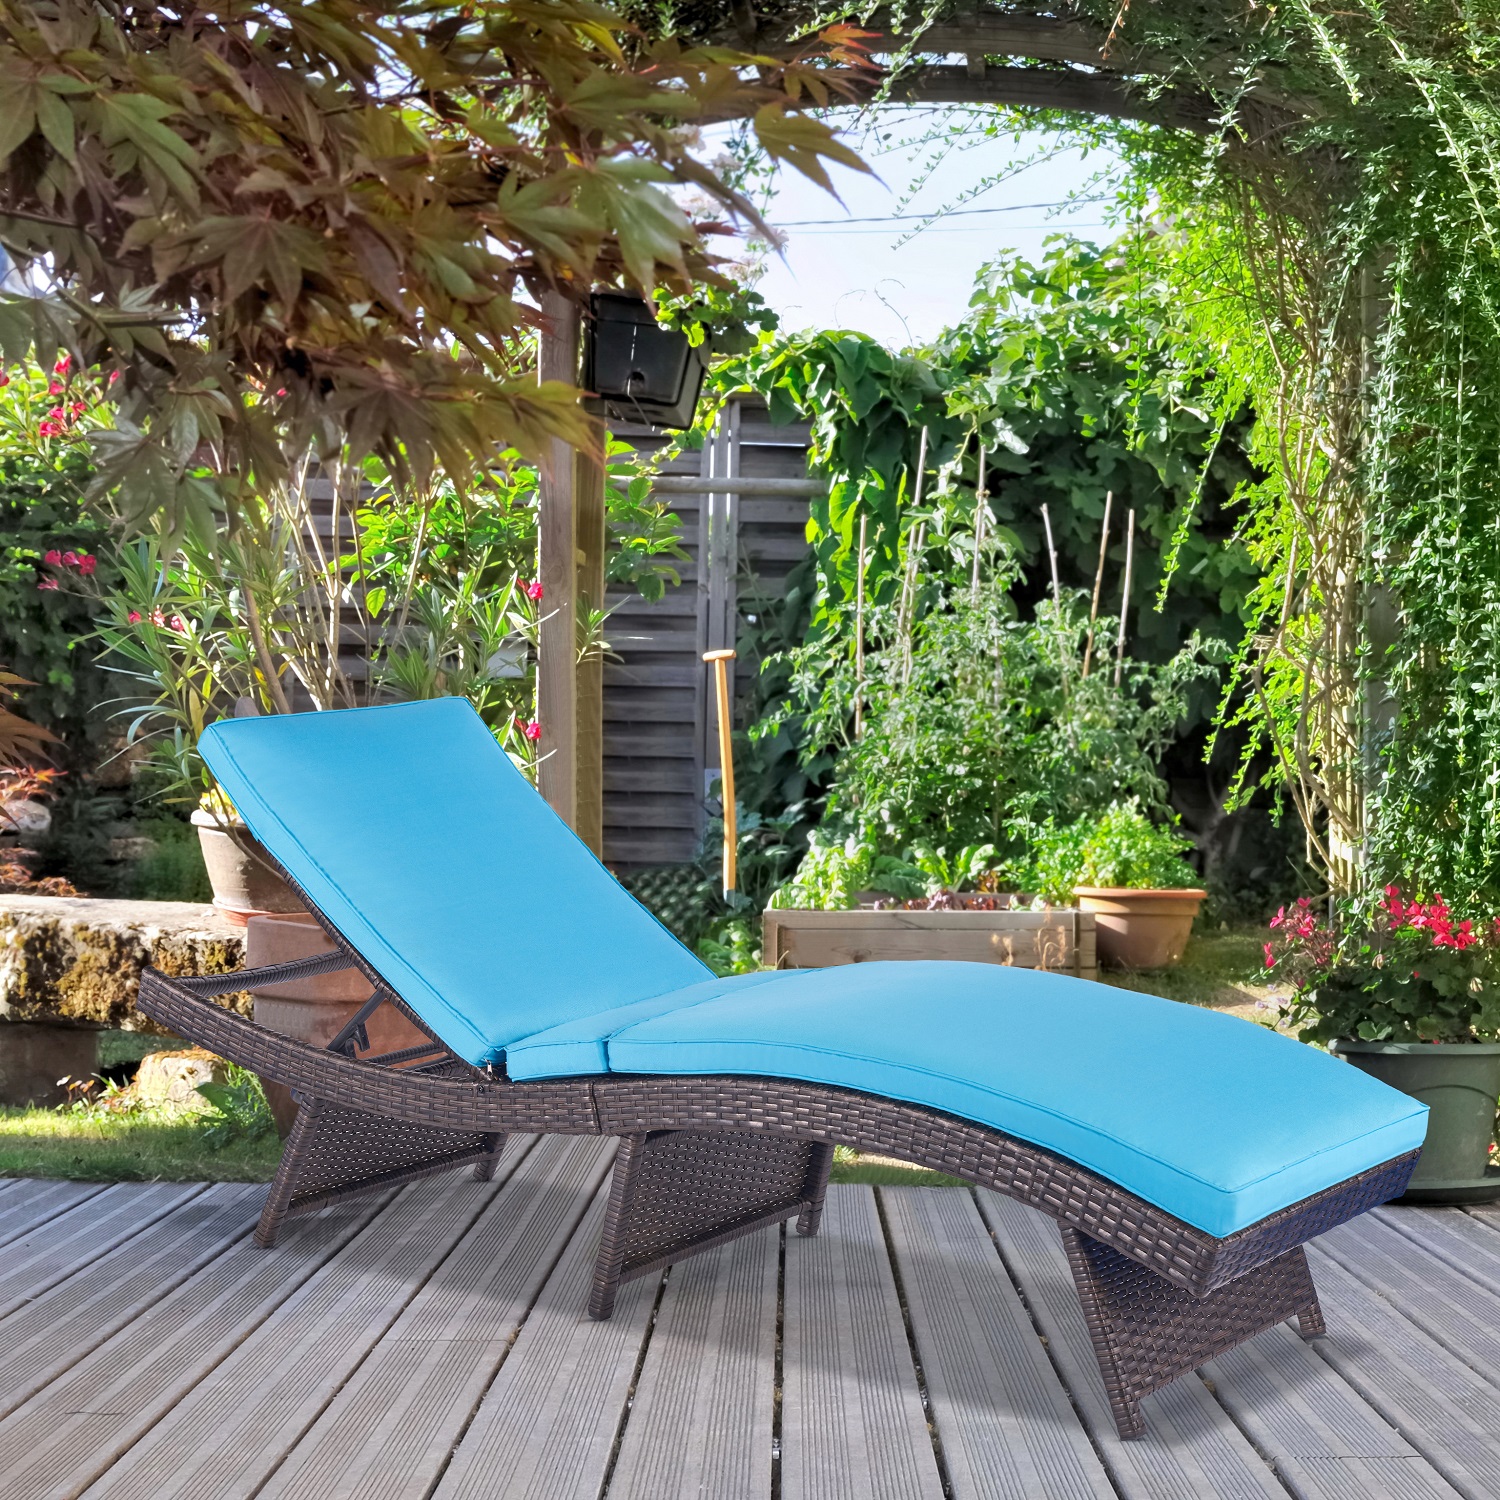 Chaise Lounge Chairs for Outside Foldable Outdoor Patio Wicker Lounge Chair Assembled Rattan Sunbathing Reclining Sunbed Layout Chair with Cushion Blue S Type Adjustable Backrest, No Assembly Required - image 2 of 7